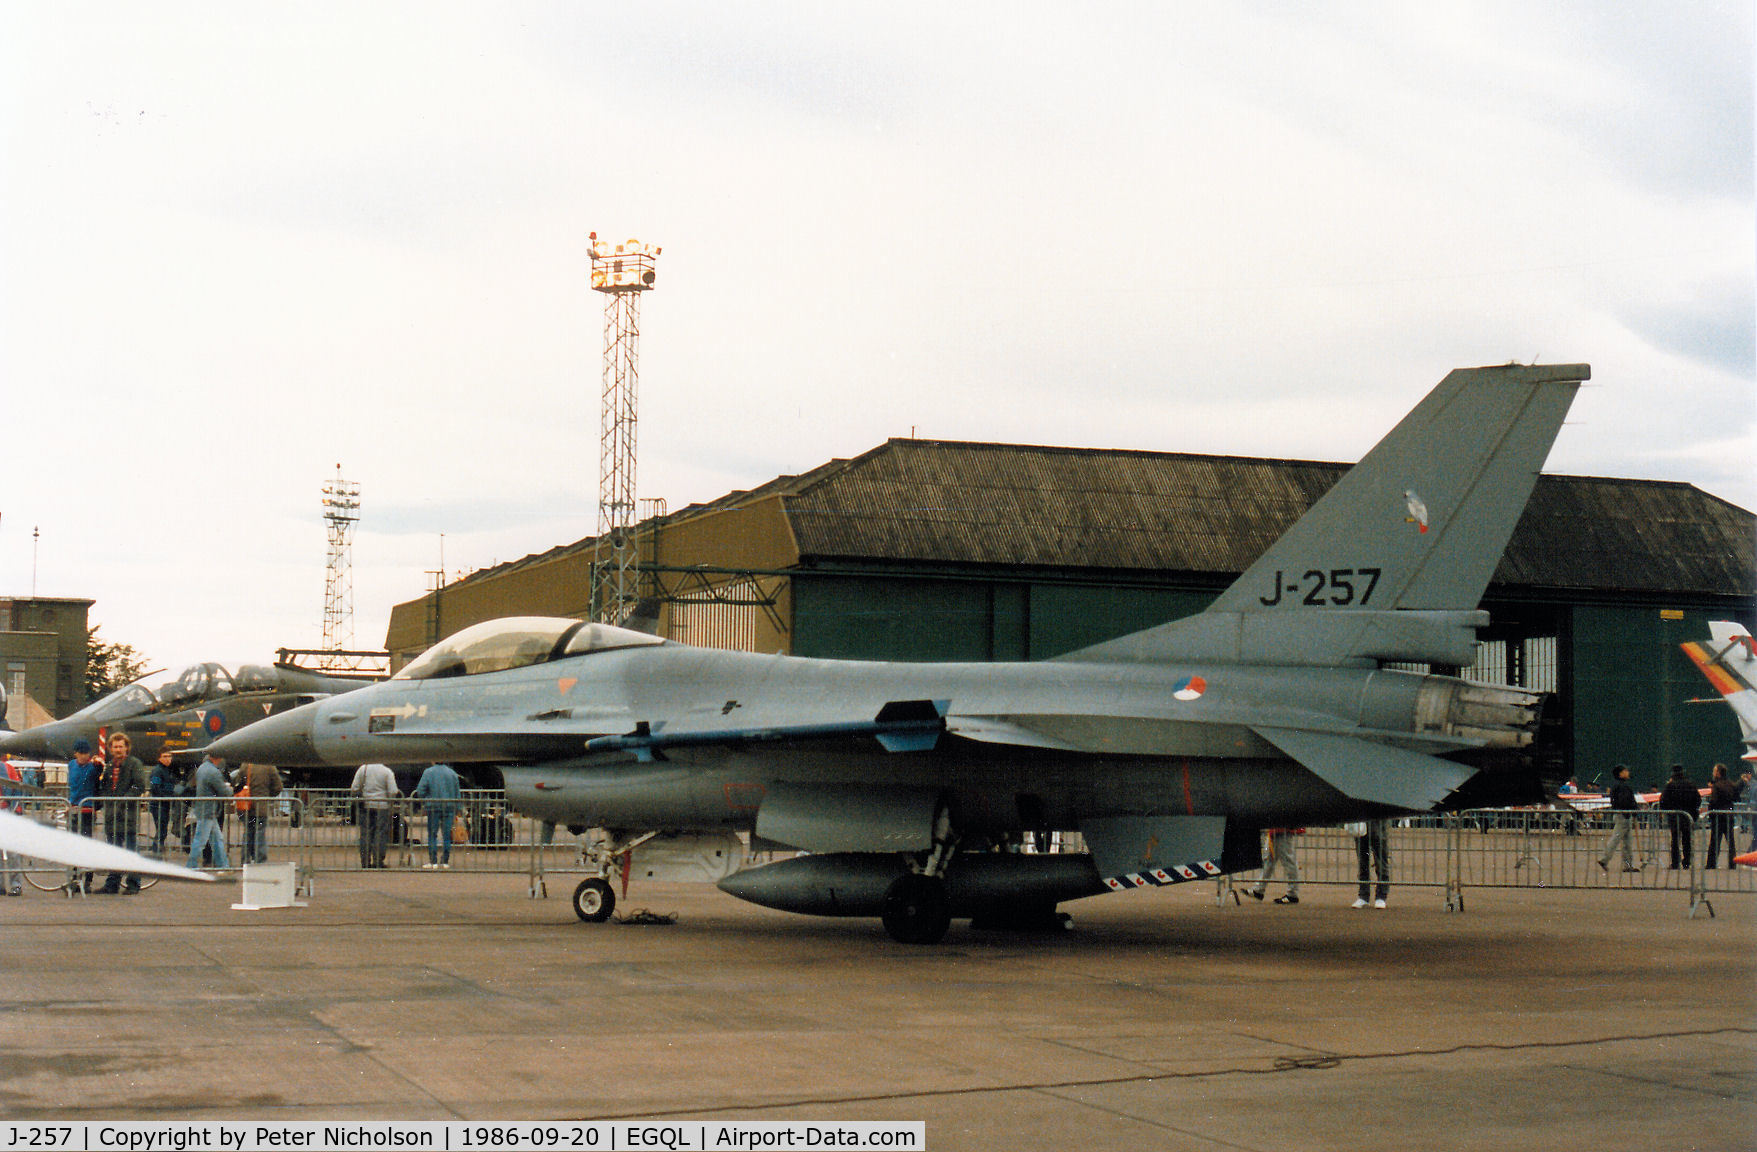 J-257, Fokker F-16A Fighting Falcon C/N 6D-46, Another view of the 322 Squadron F-16A Falcon of the Royal Netherlands Air Force at Leeuwarden on display at the 1986 RAF Leuchars Airshow.